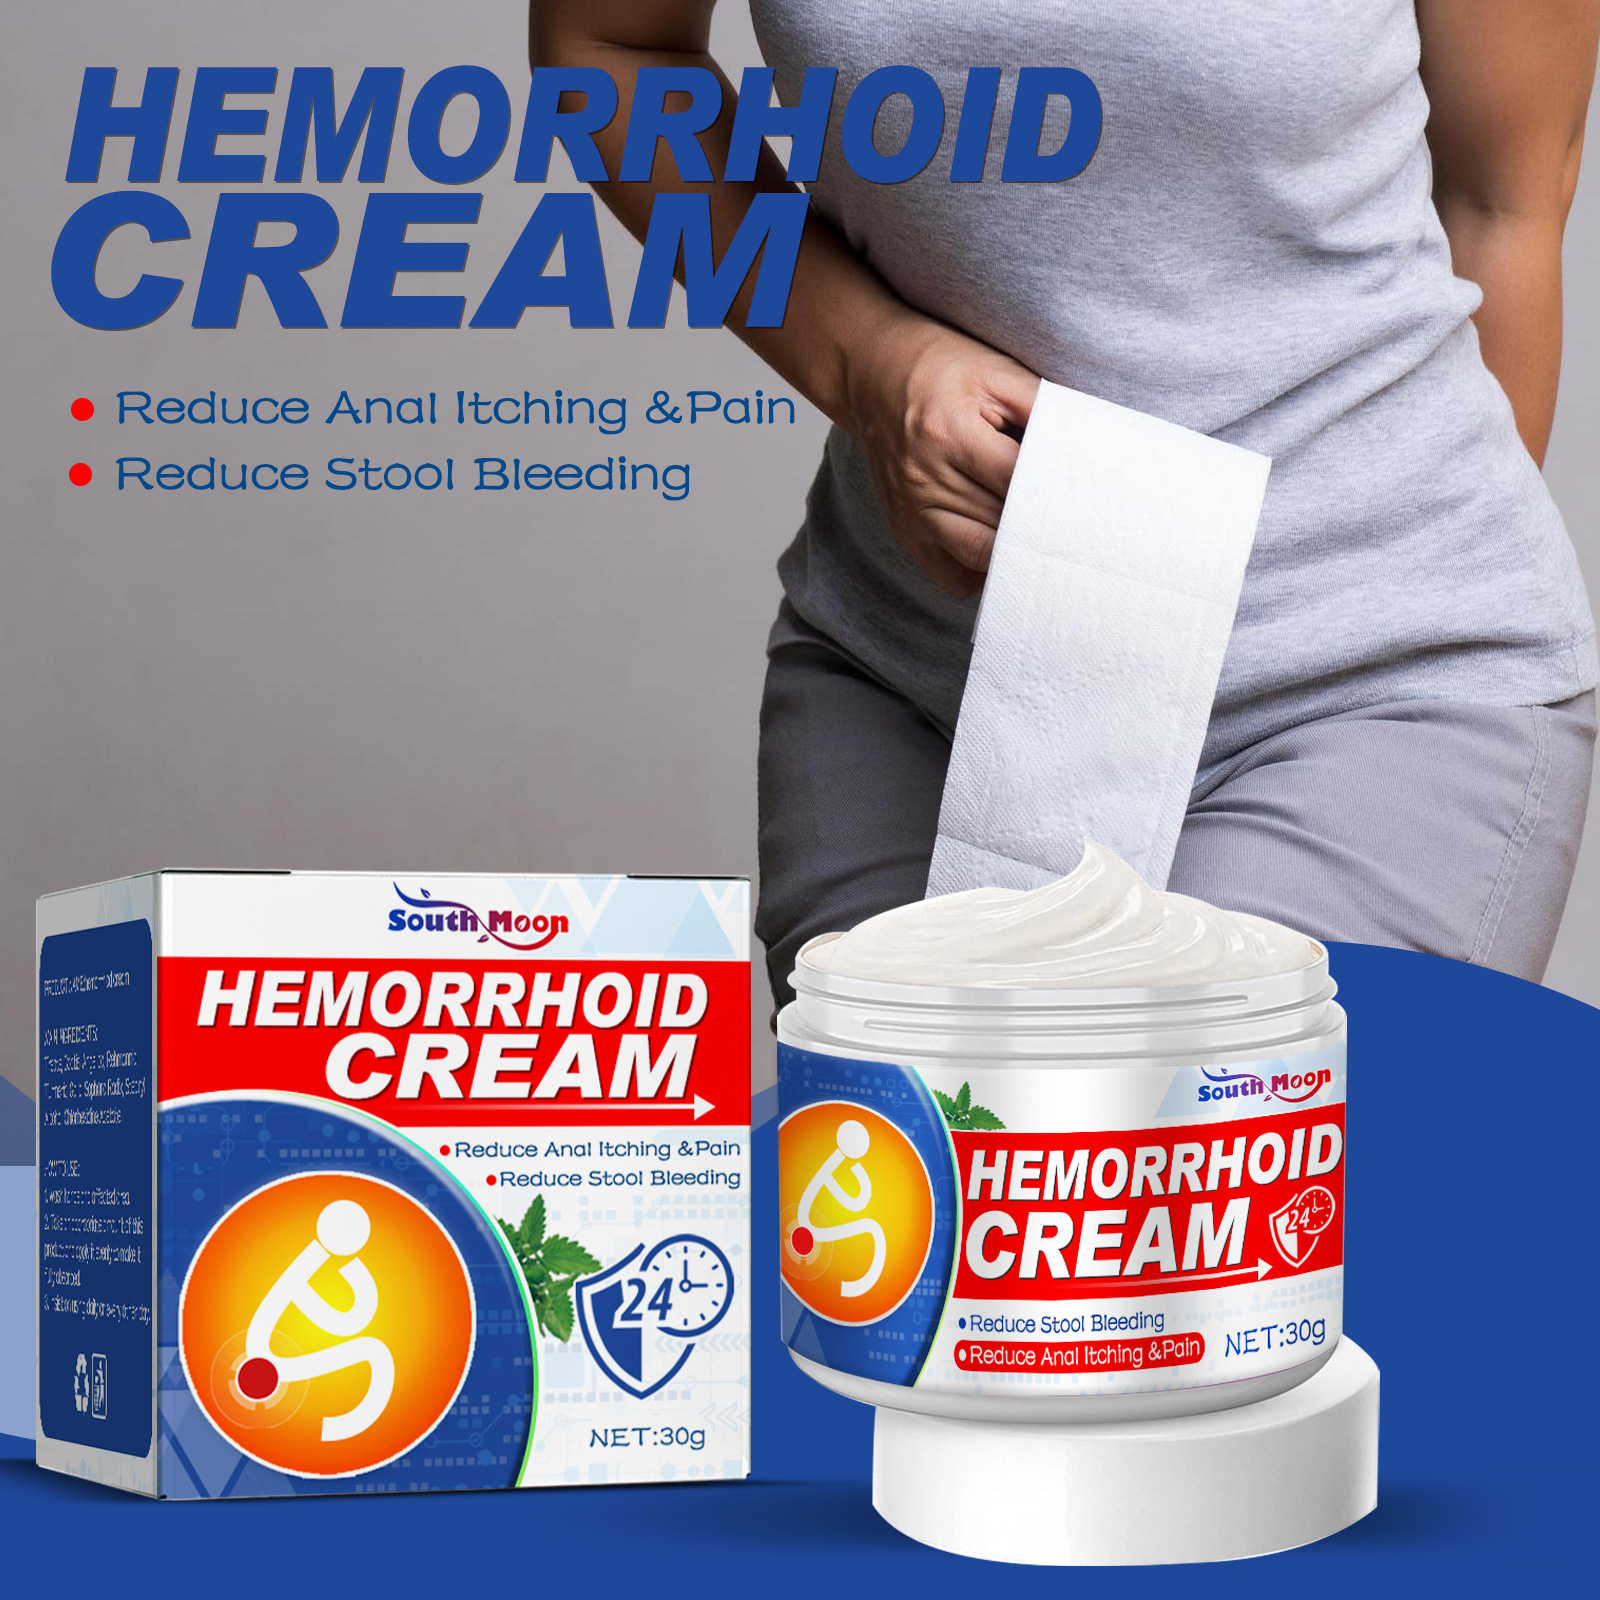 South Moon hemorrhoid ointment eliminate...